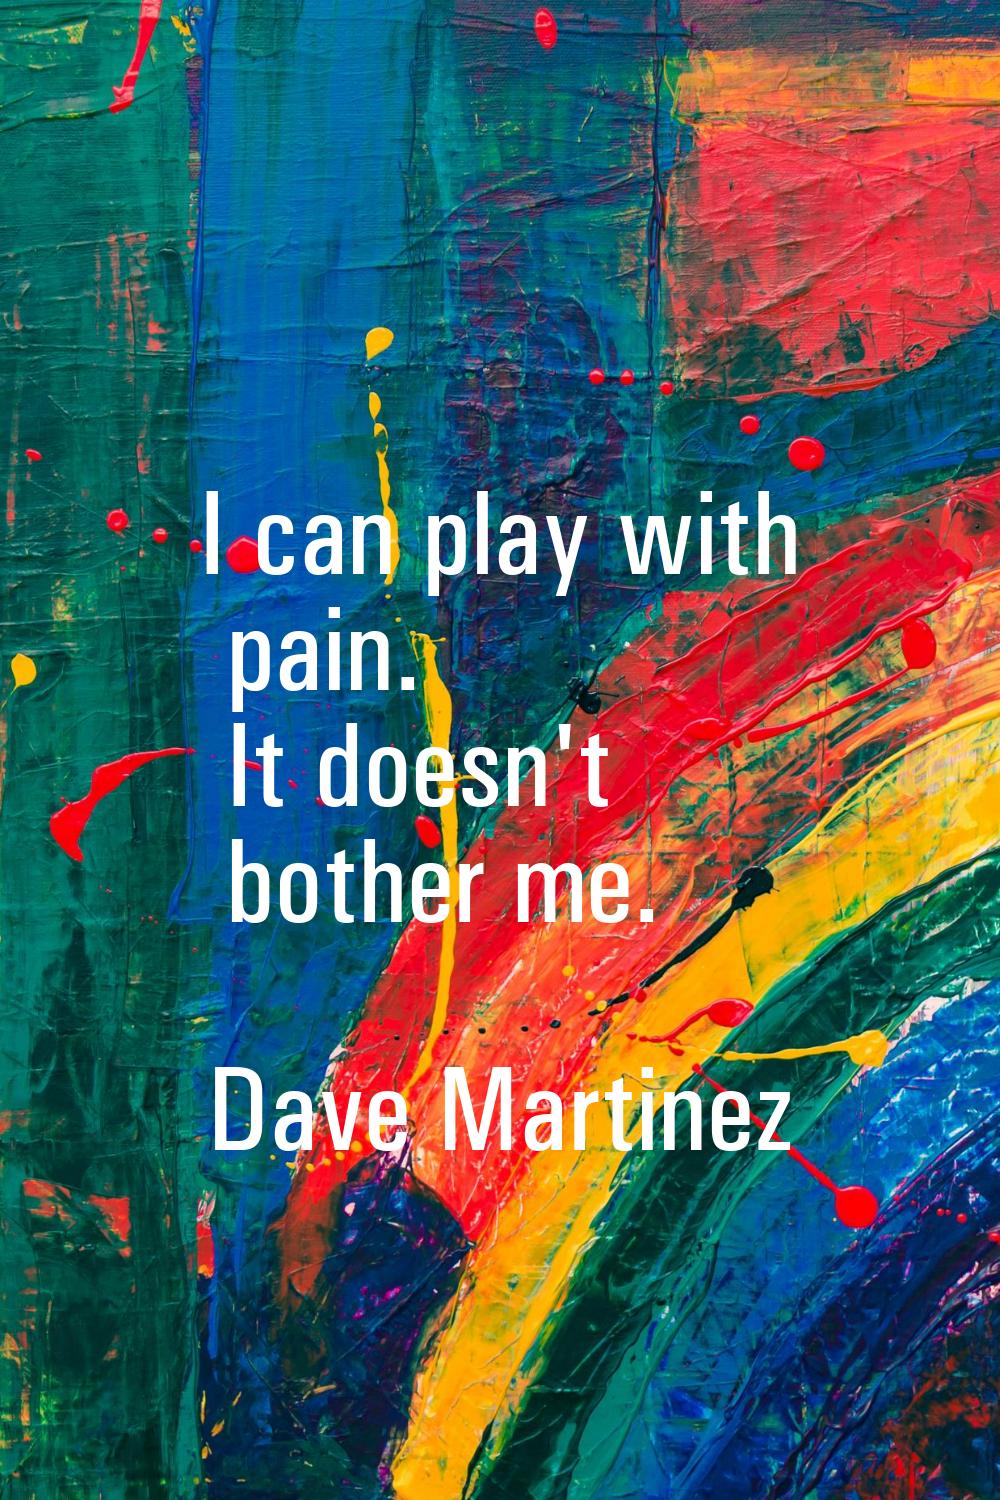 I can play with pain. It doesn't bother me.